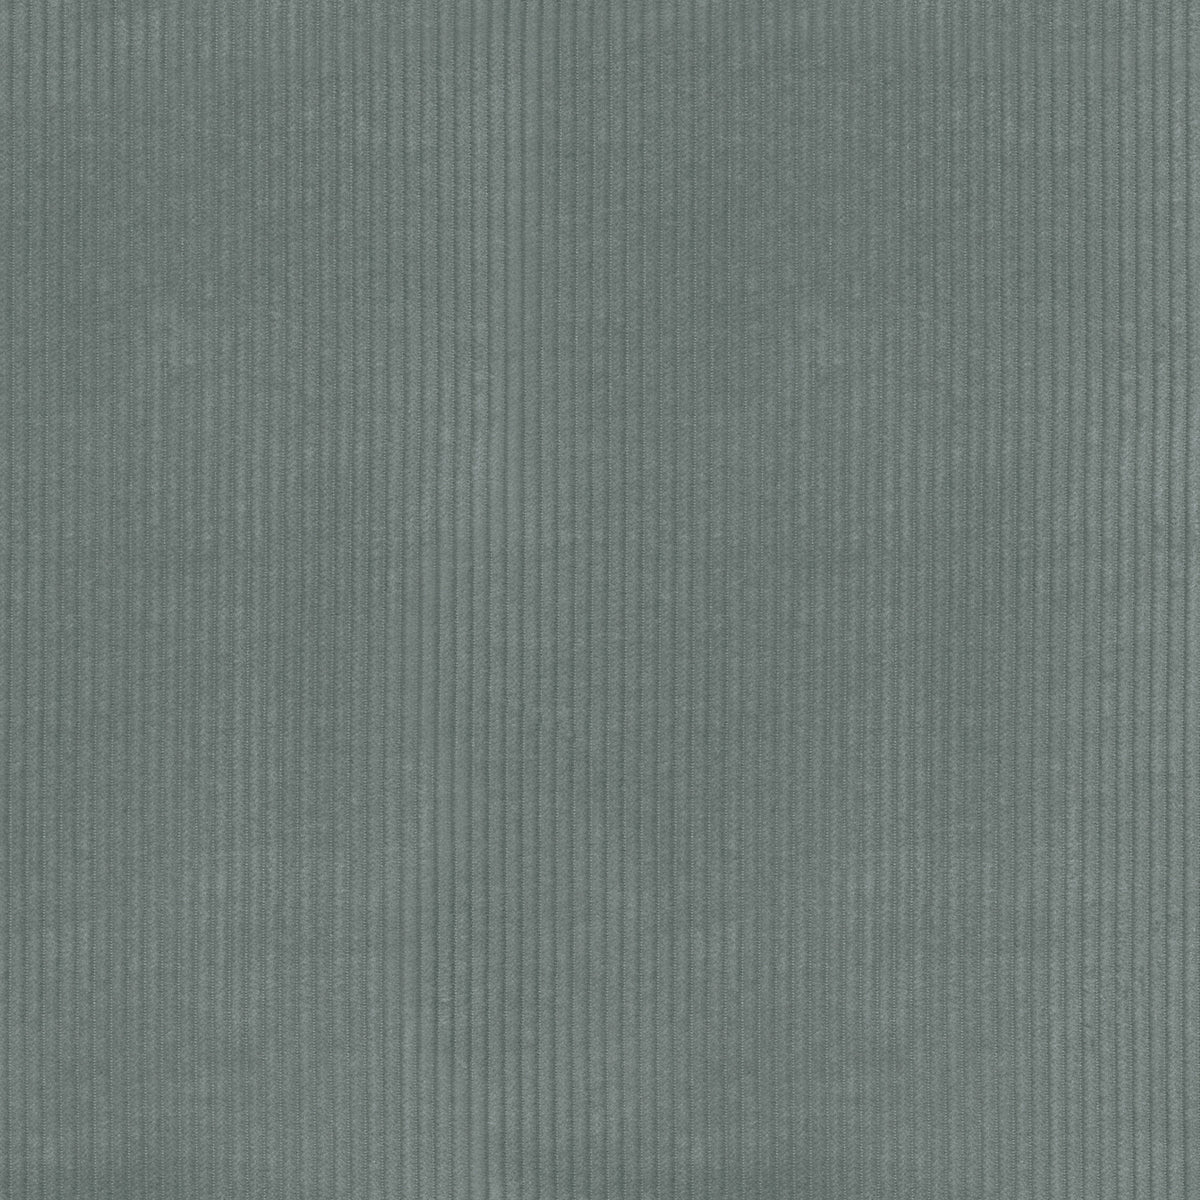 P/K Lifestyles Wales - Nickel 412041 Upholstery Fabric